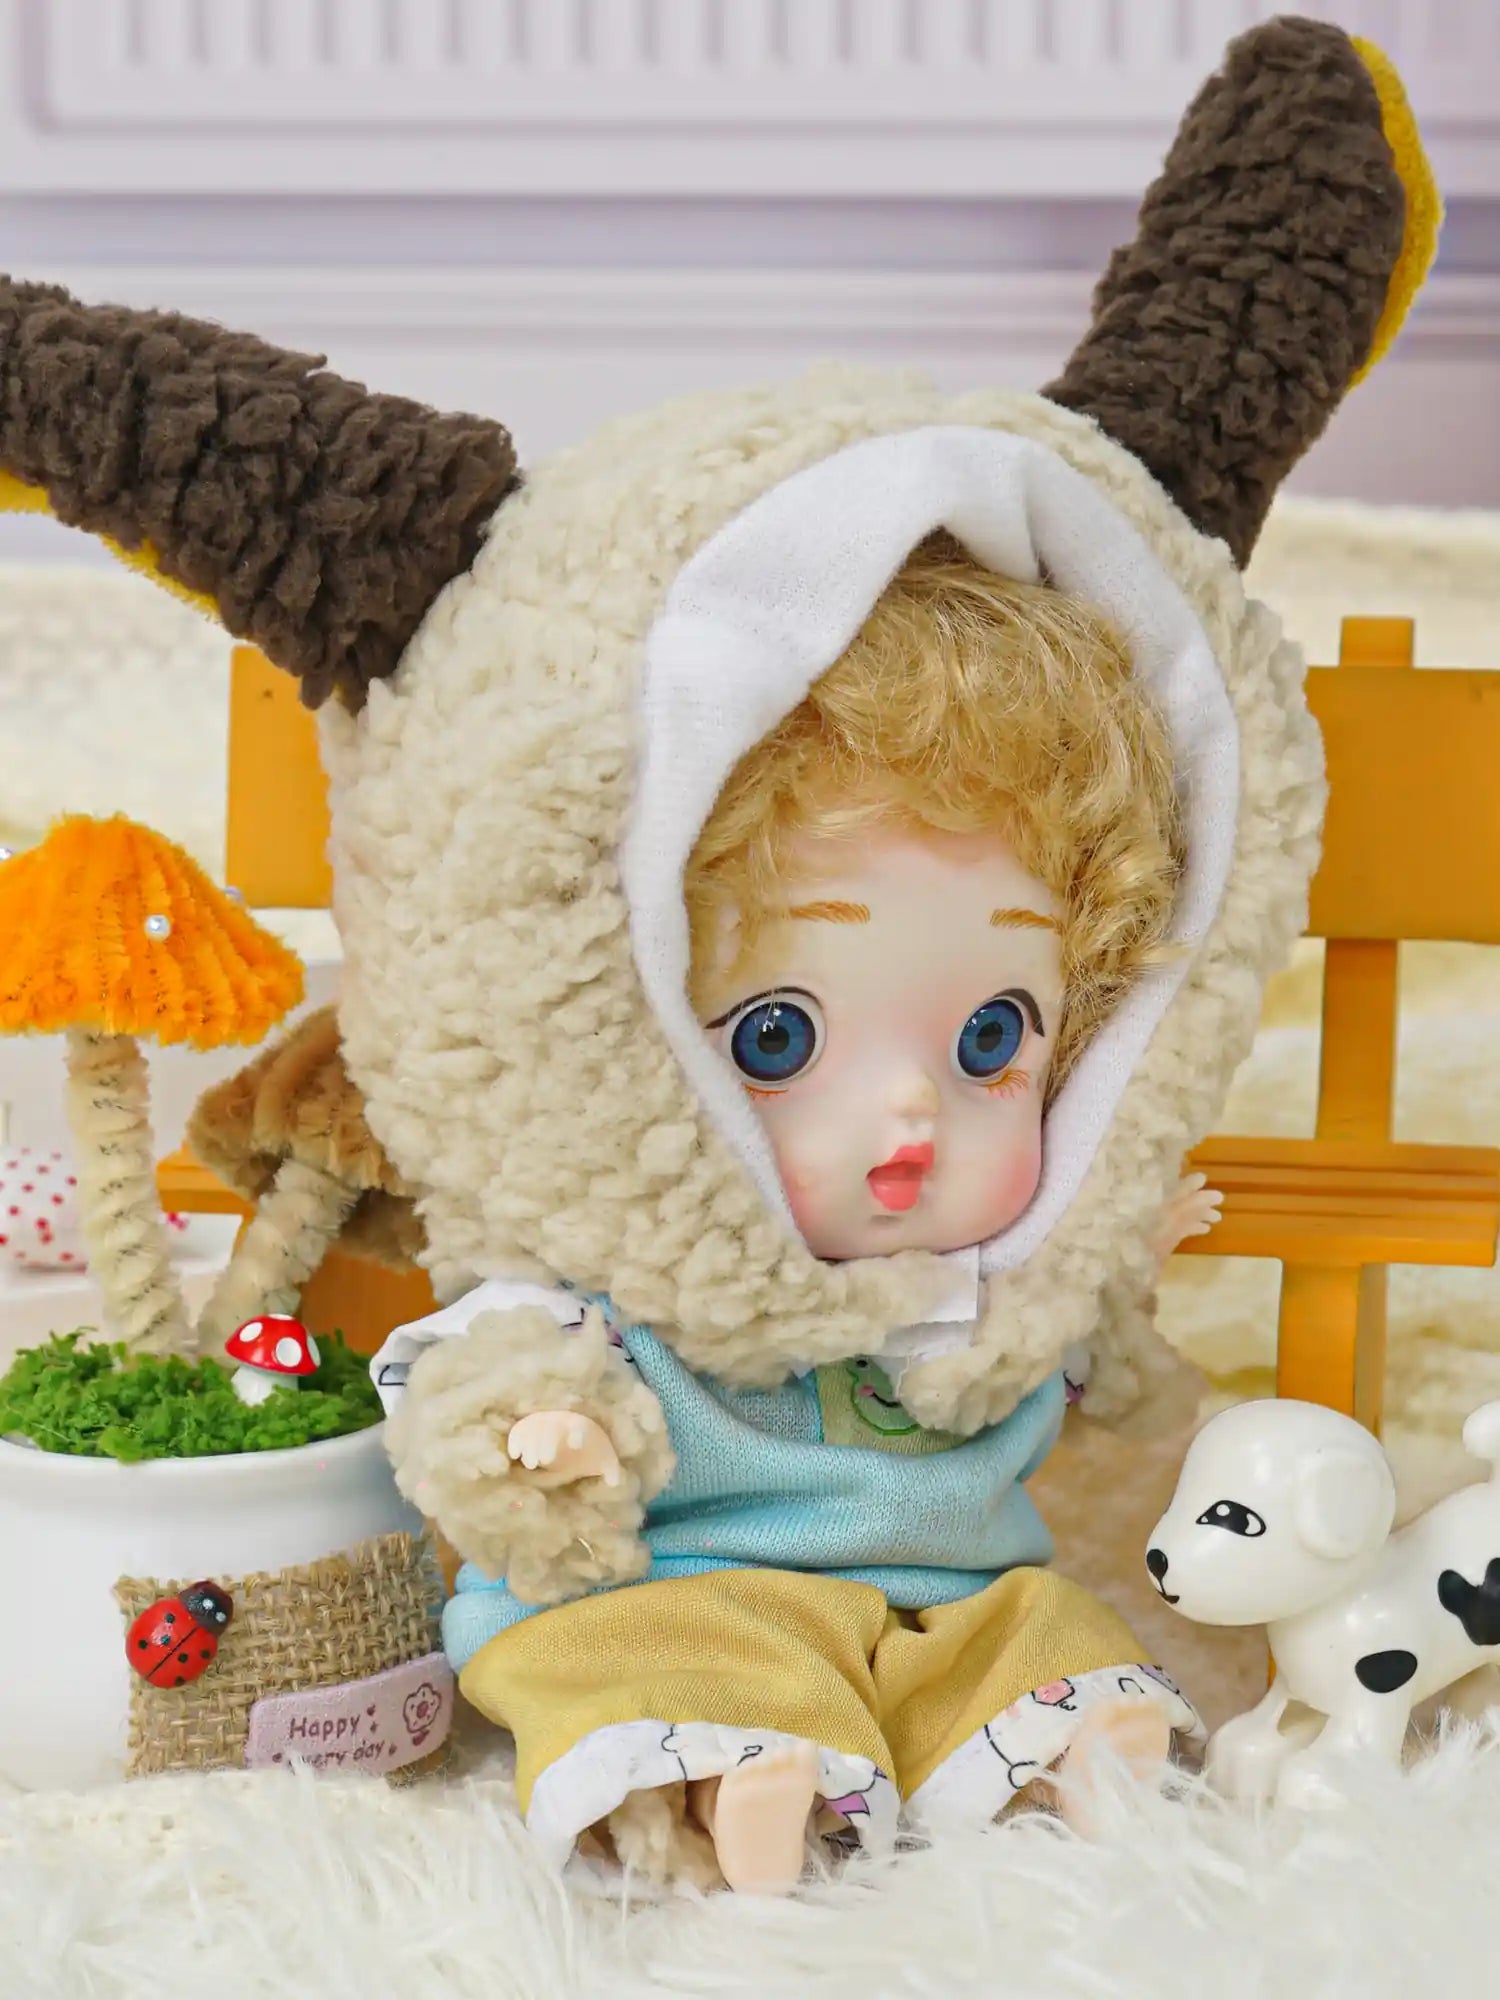 A golden-curled BJD wearing a lamb costume with adorable miniatures, including a Parisian Eiffel Tower replica.